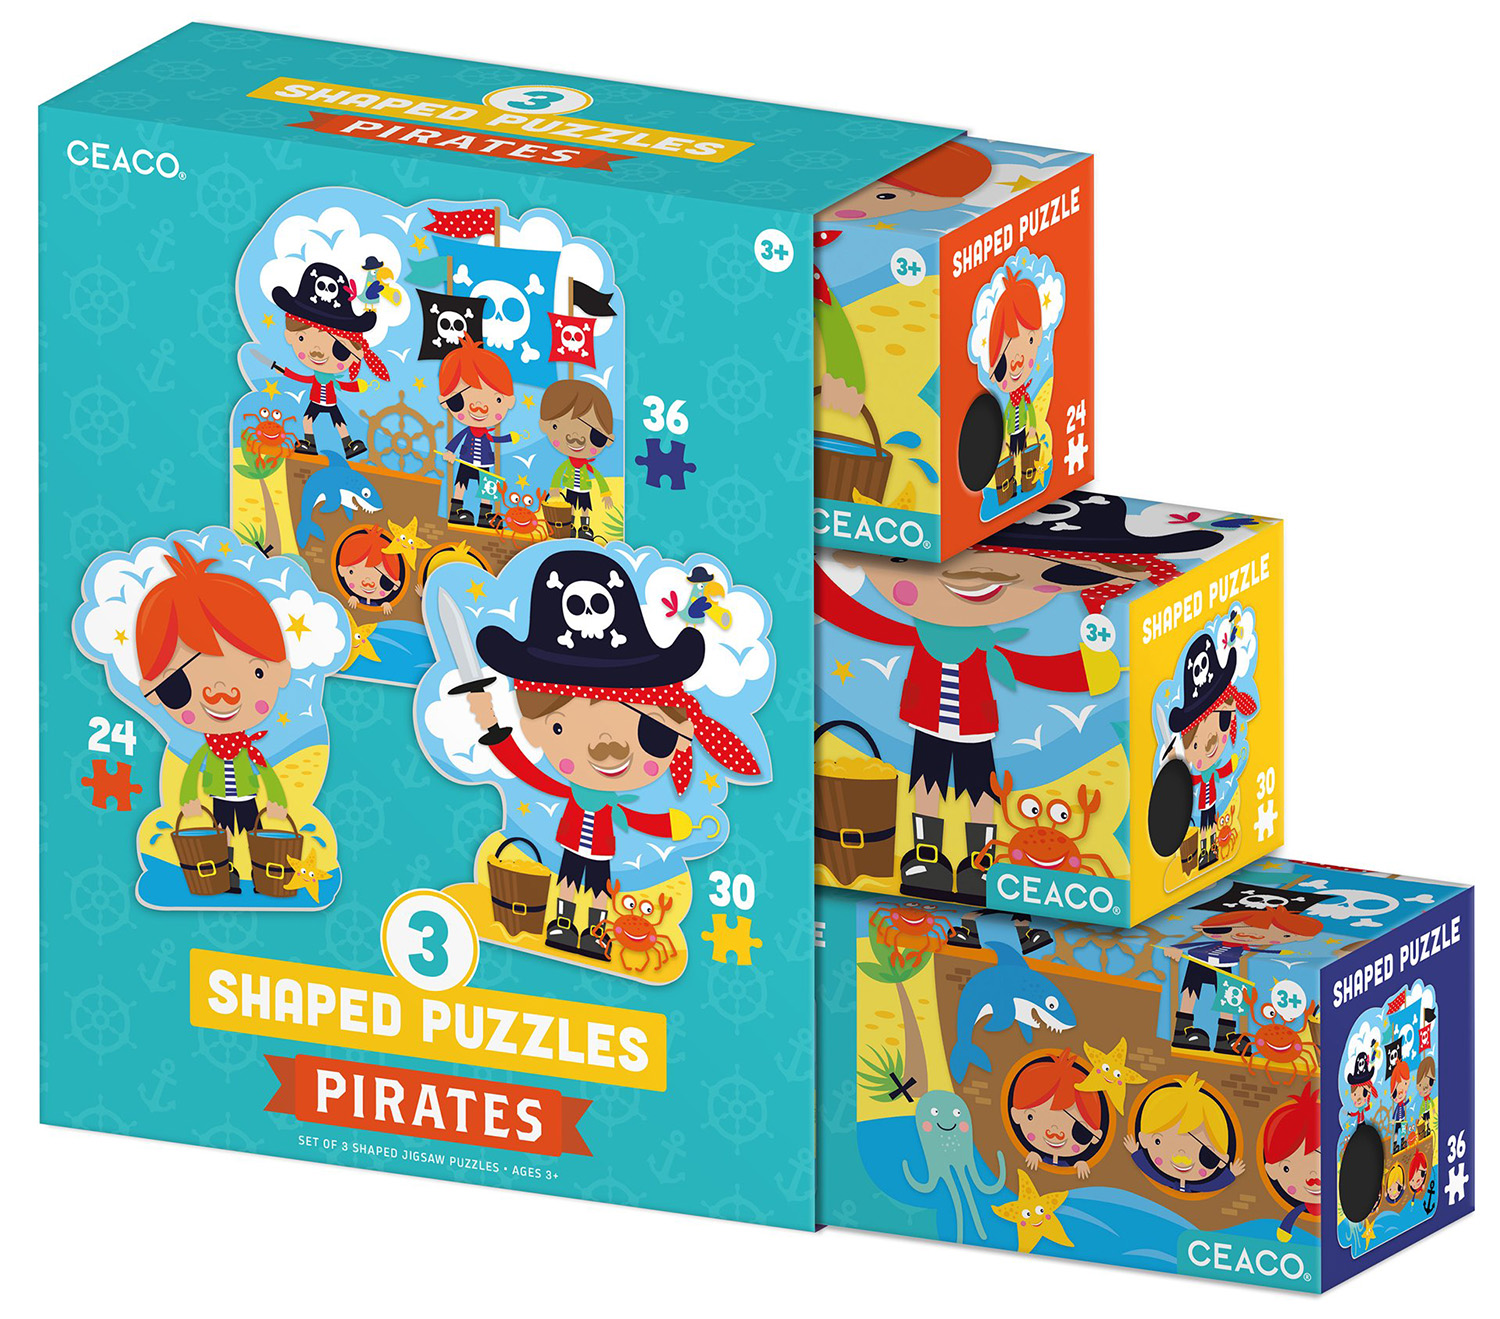 Shaped Puzzles Pirates